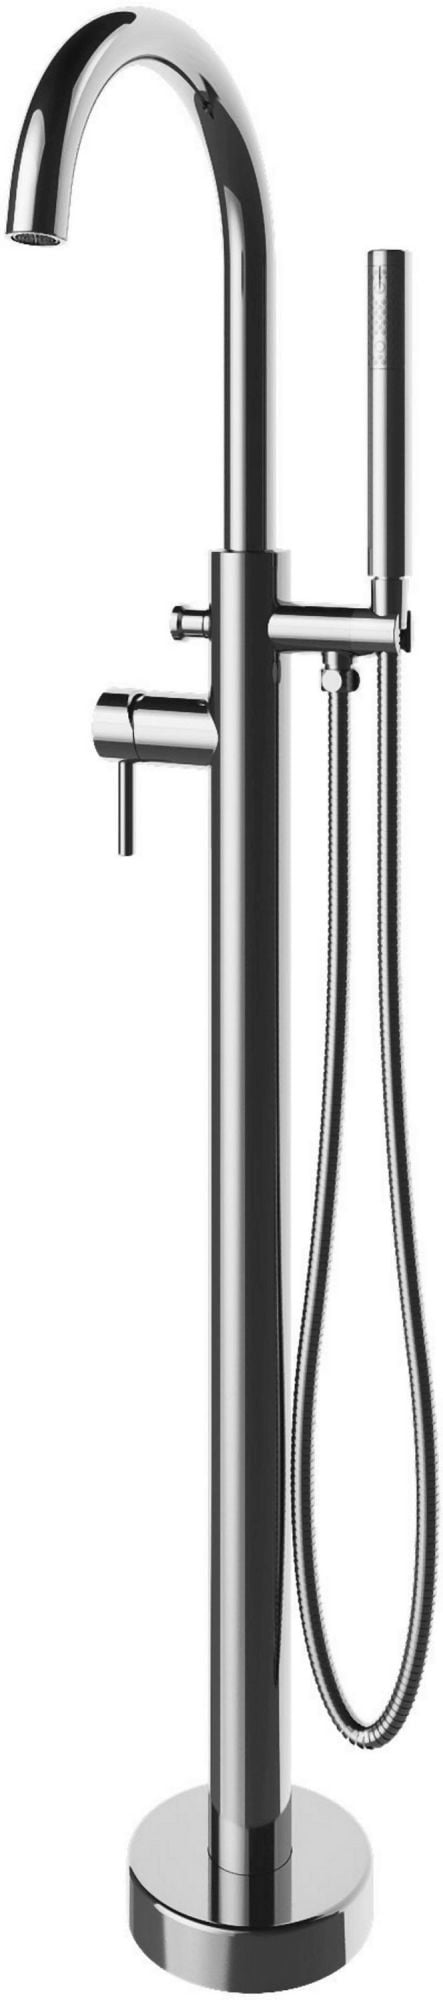 Picture of A&E Bath & Shower FSTF-01-R-CR Milan Freestanding Faucet Round Spout with Polished Chrome Finish